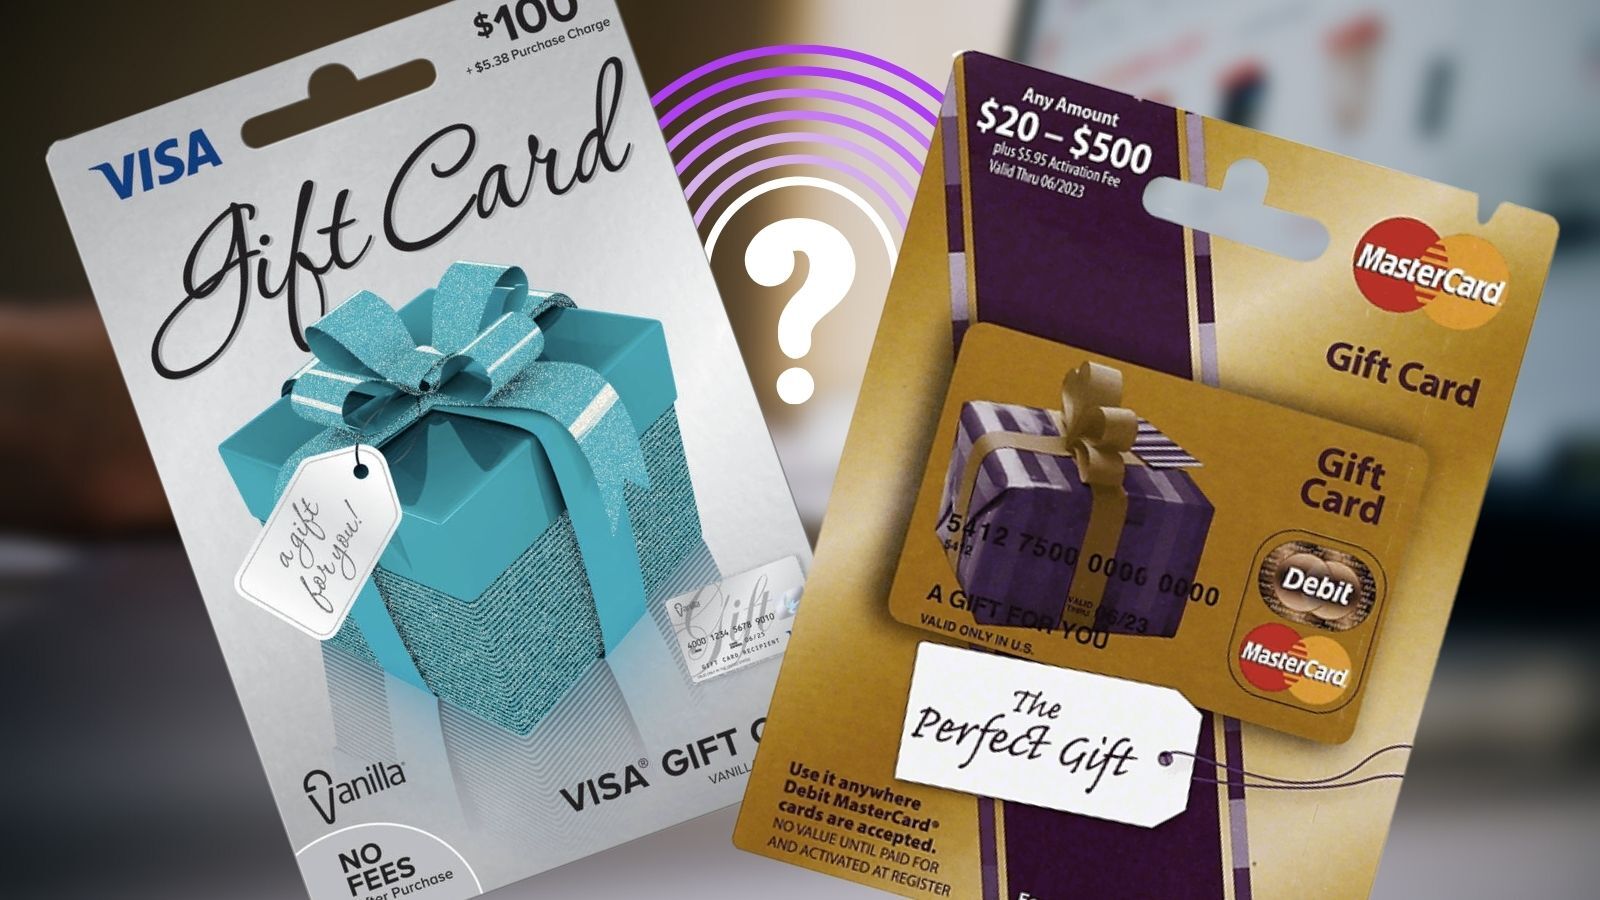 How Much Does a $100 Visa Gift Card Cost 